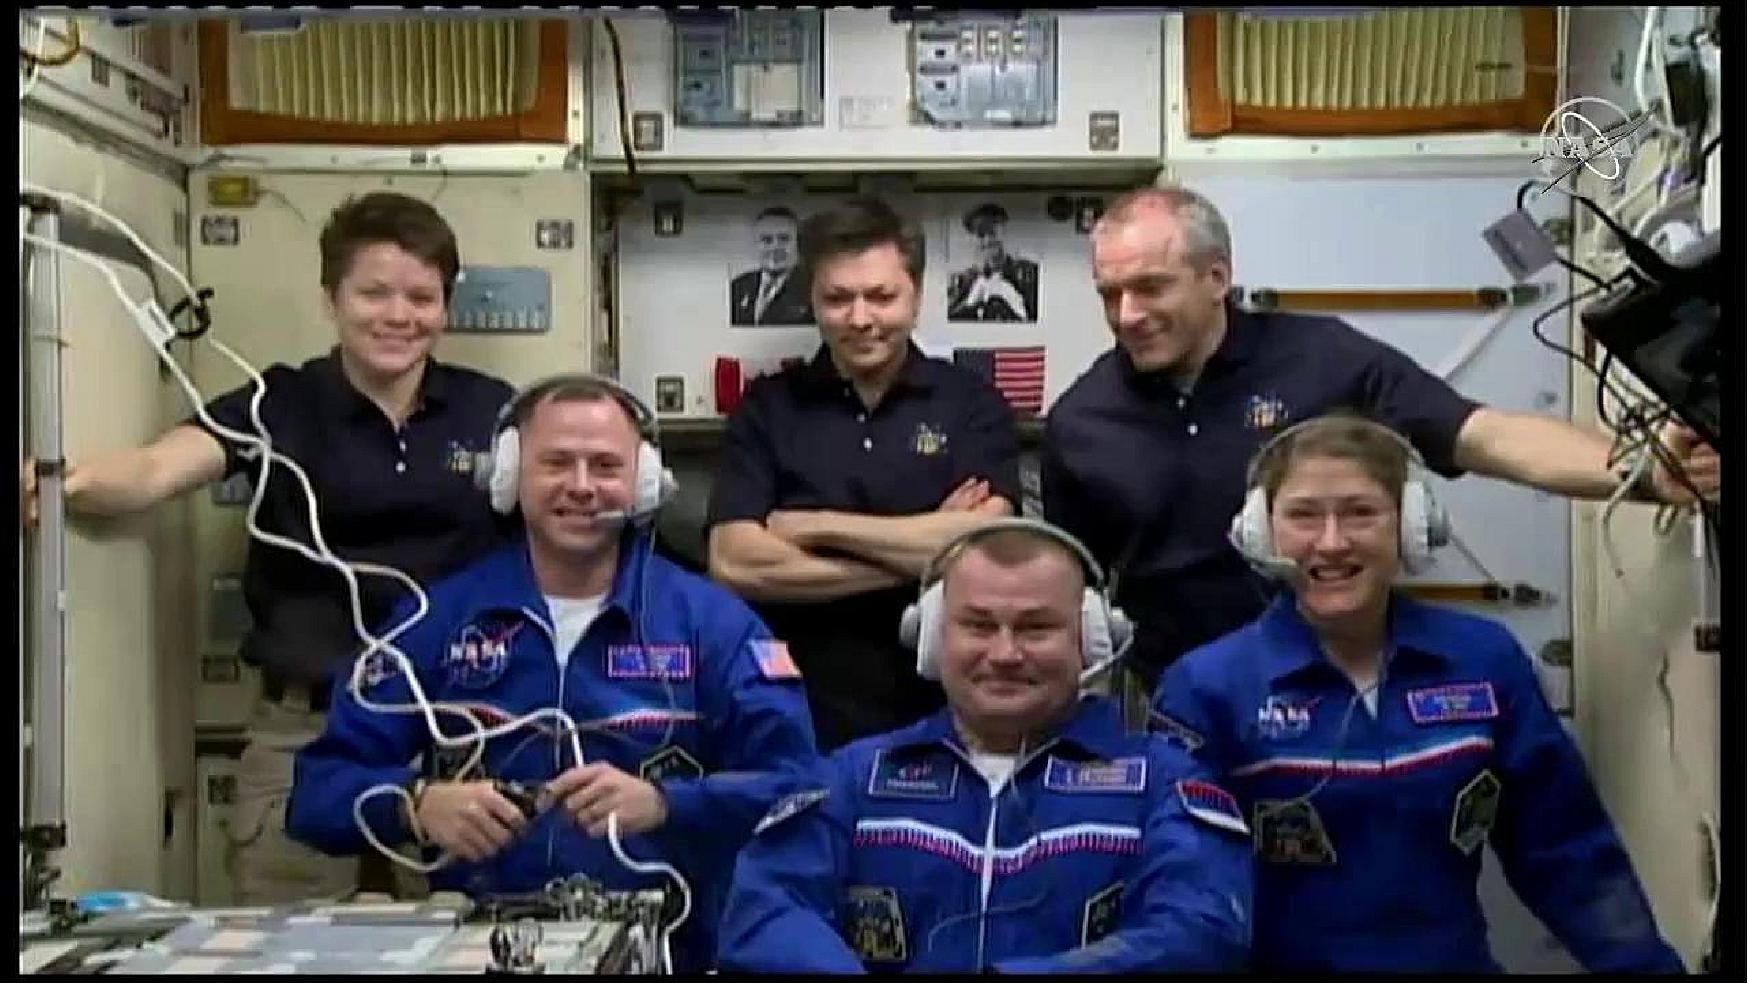 Figure 105: Expedition 59 crew members Anne McClain, Oleg Kononenko, and David Saint-Jacques welcome their new crew members, Nick Hague, Christina Koch, and Alexey Ovchinin, who arrived to the International Space Station on 14 March 2019 (image credit: NASA TV)